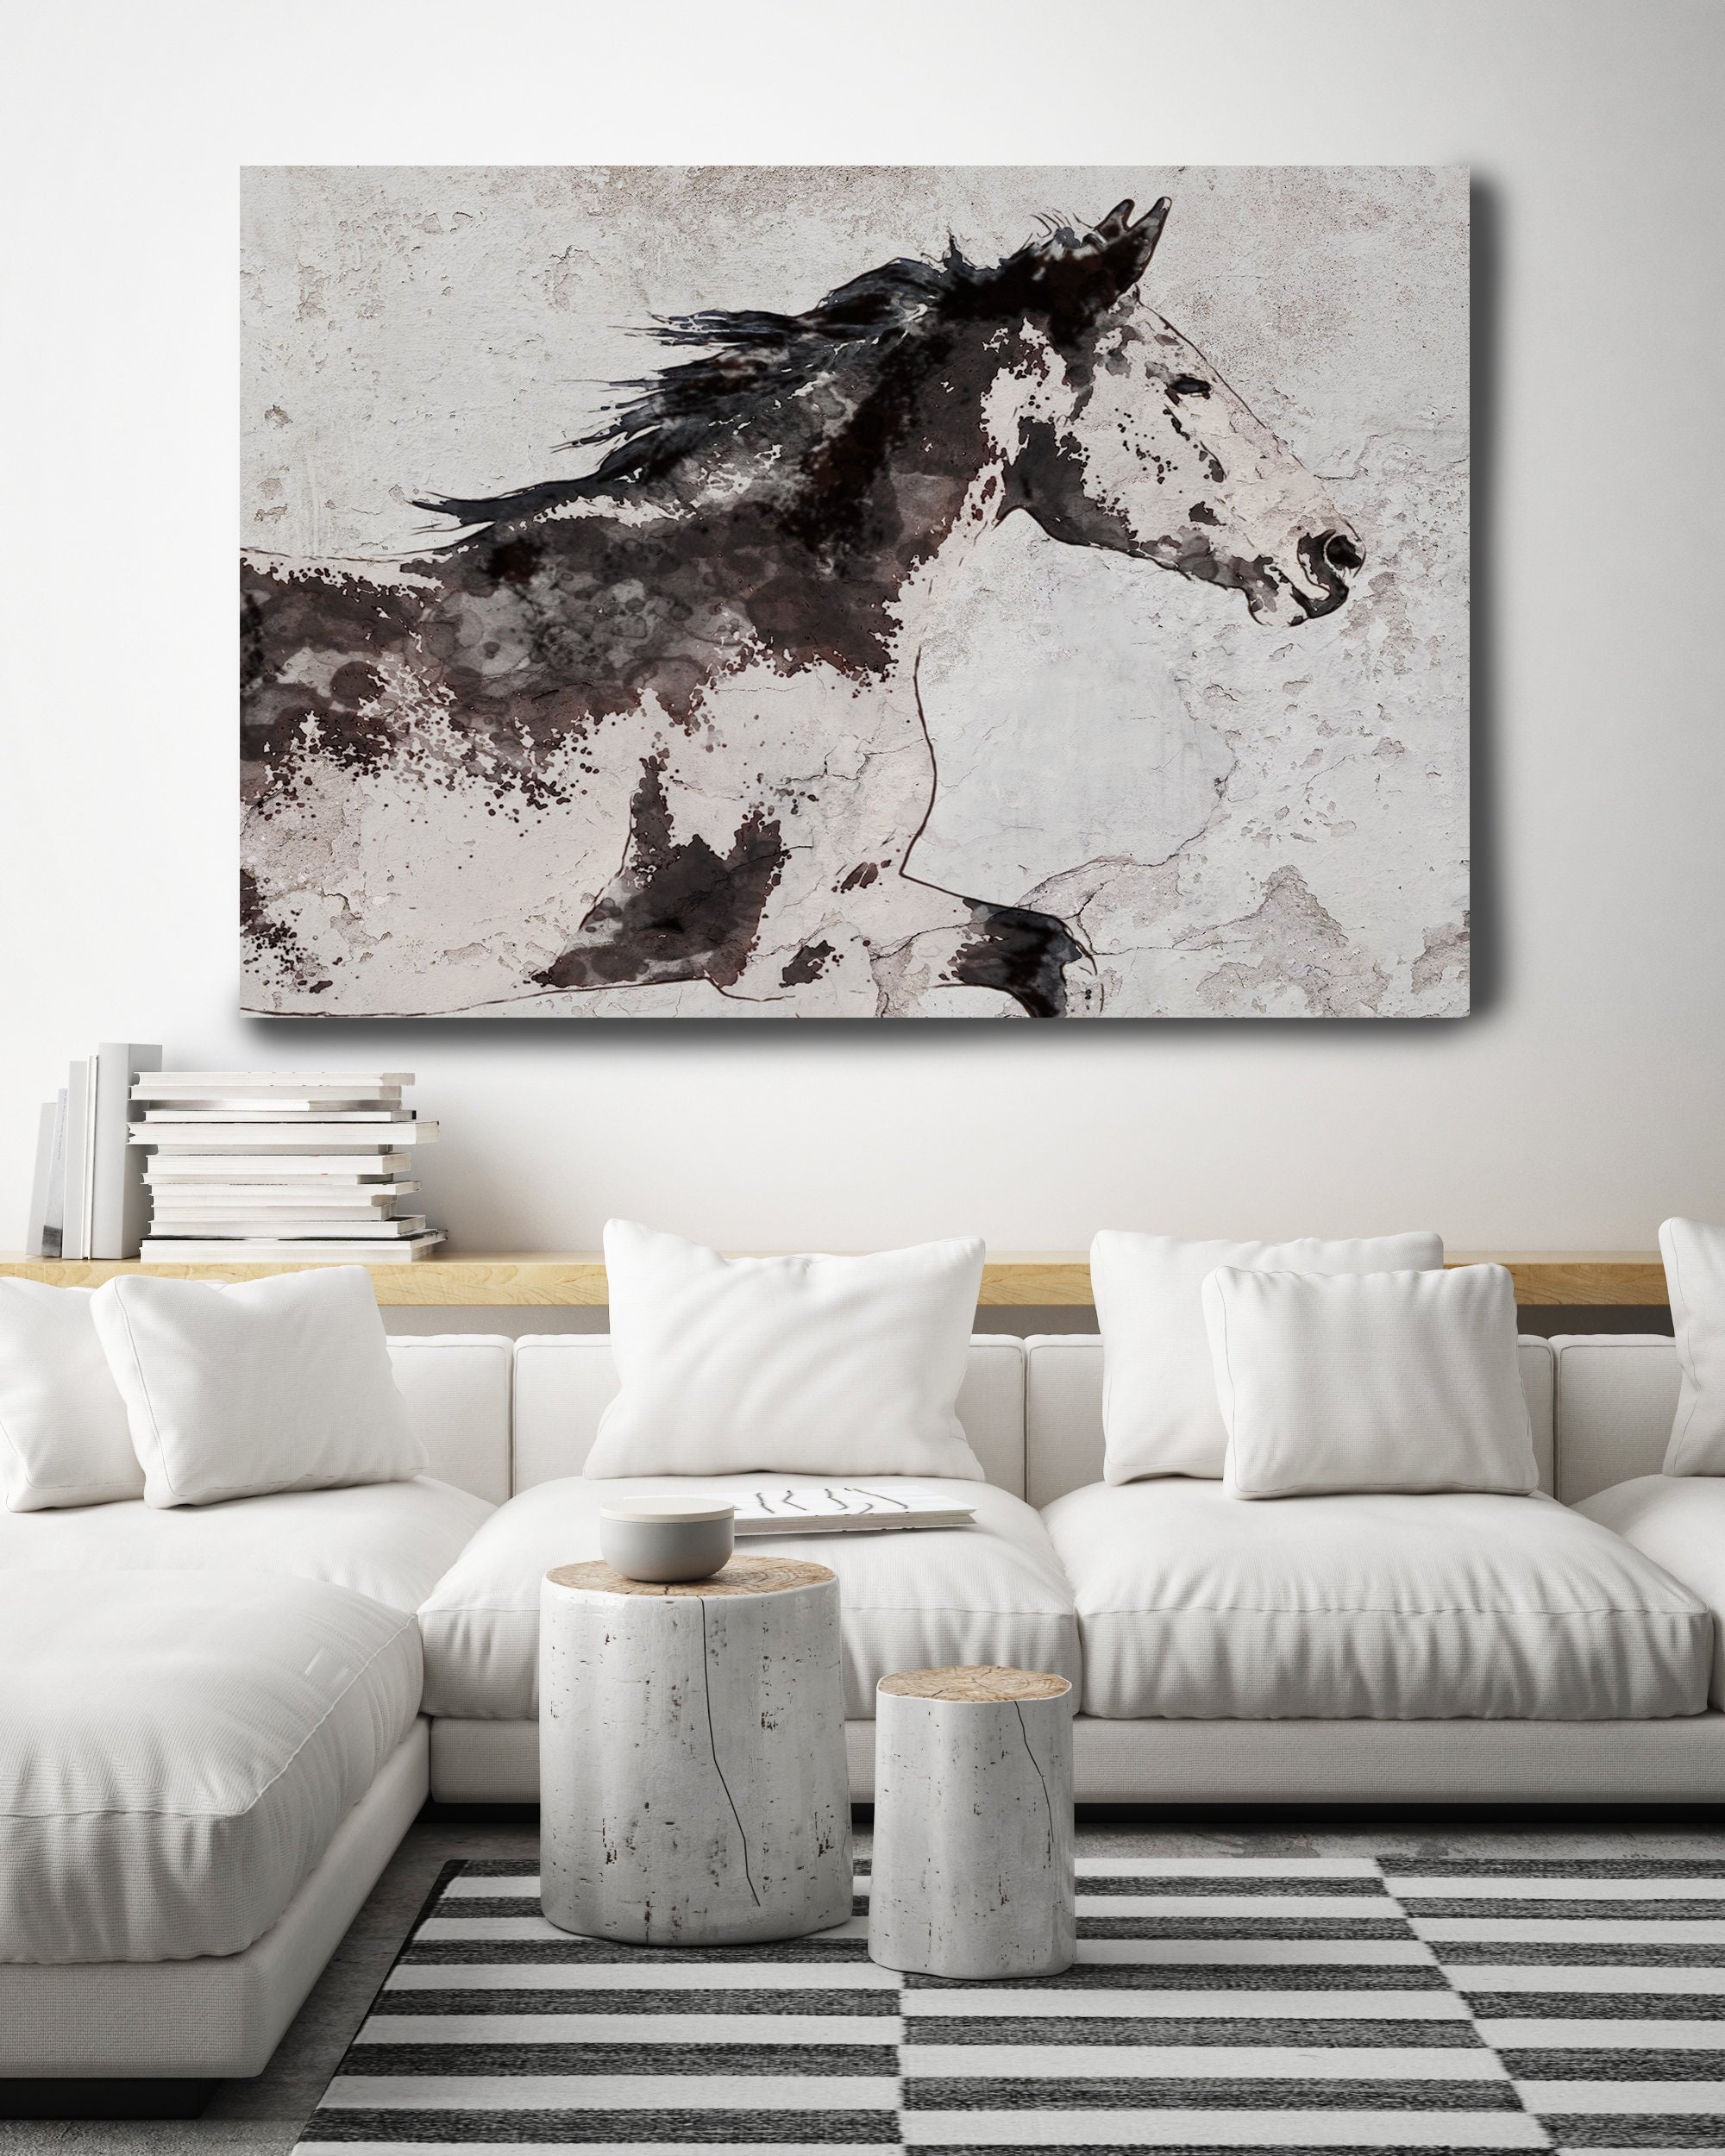 11262 Abstract Watercolor Horse Images Stock Photos  Vectors   Shutterstock